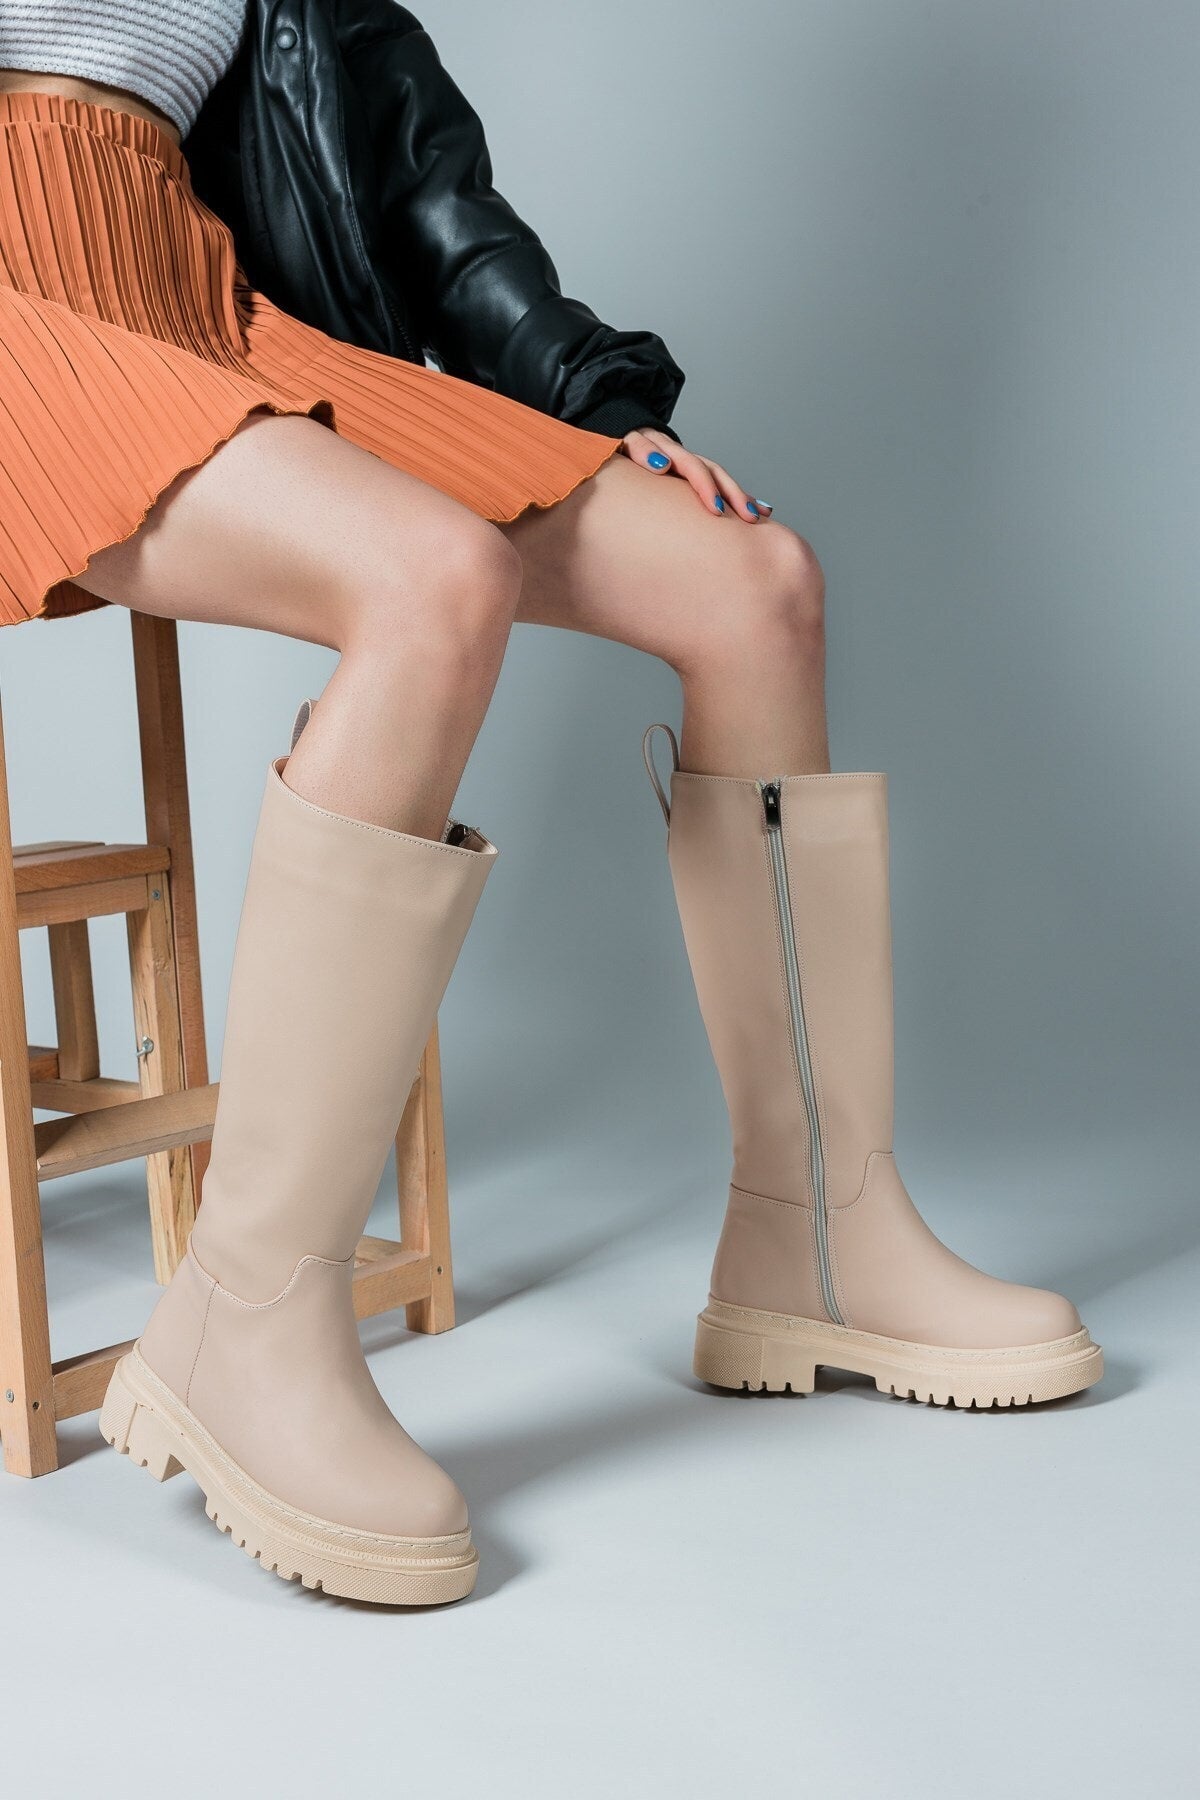 Nude Skin Woman Boots 0012360